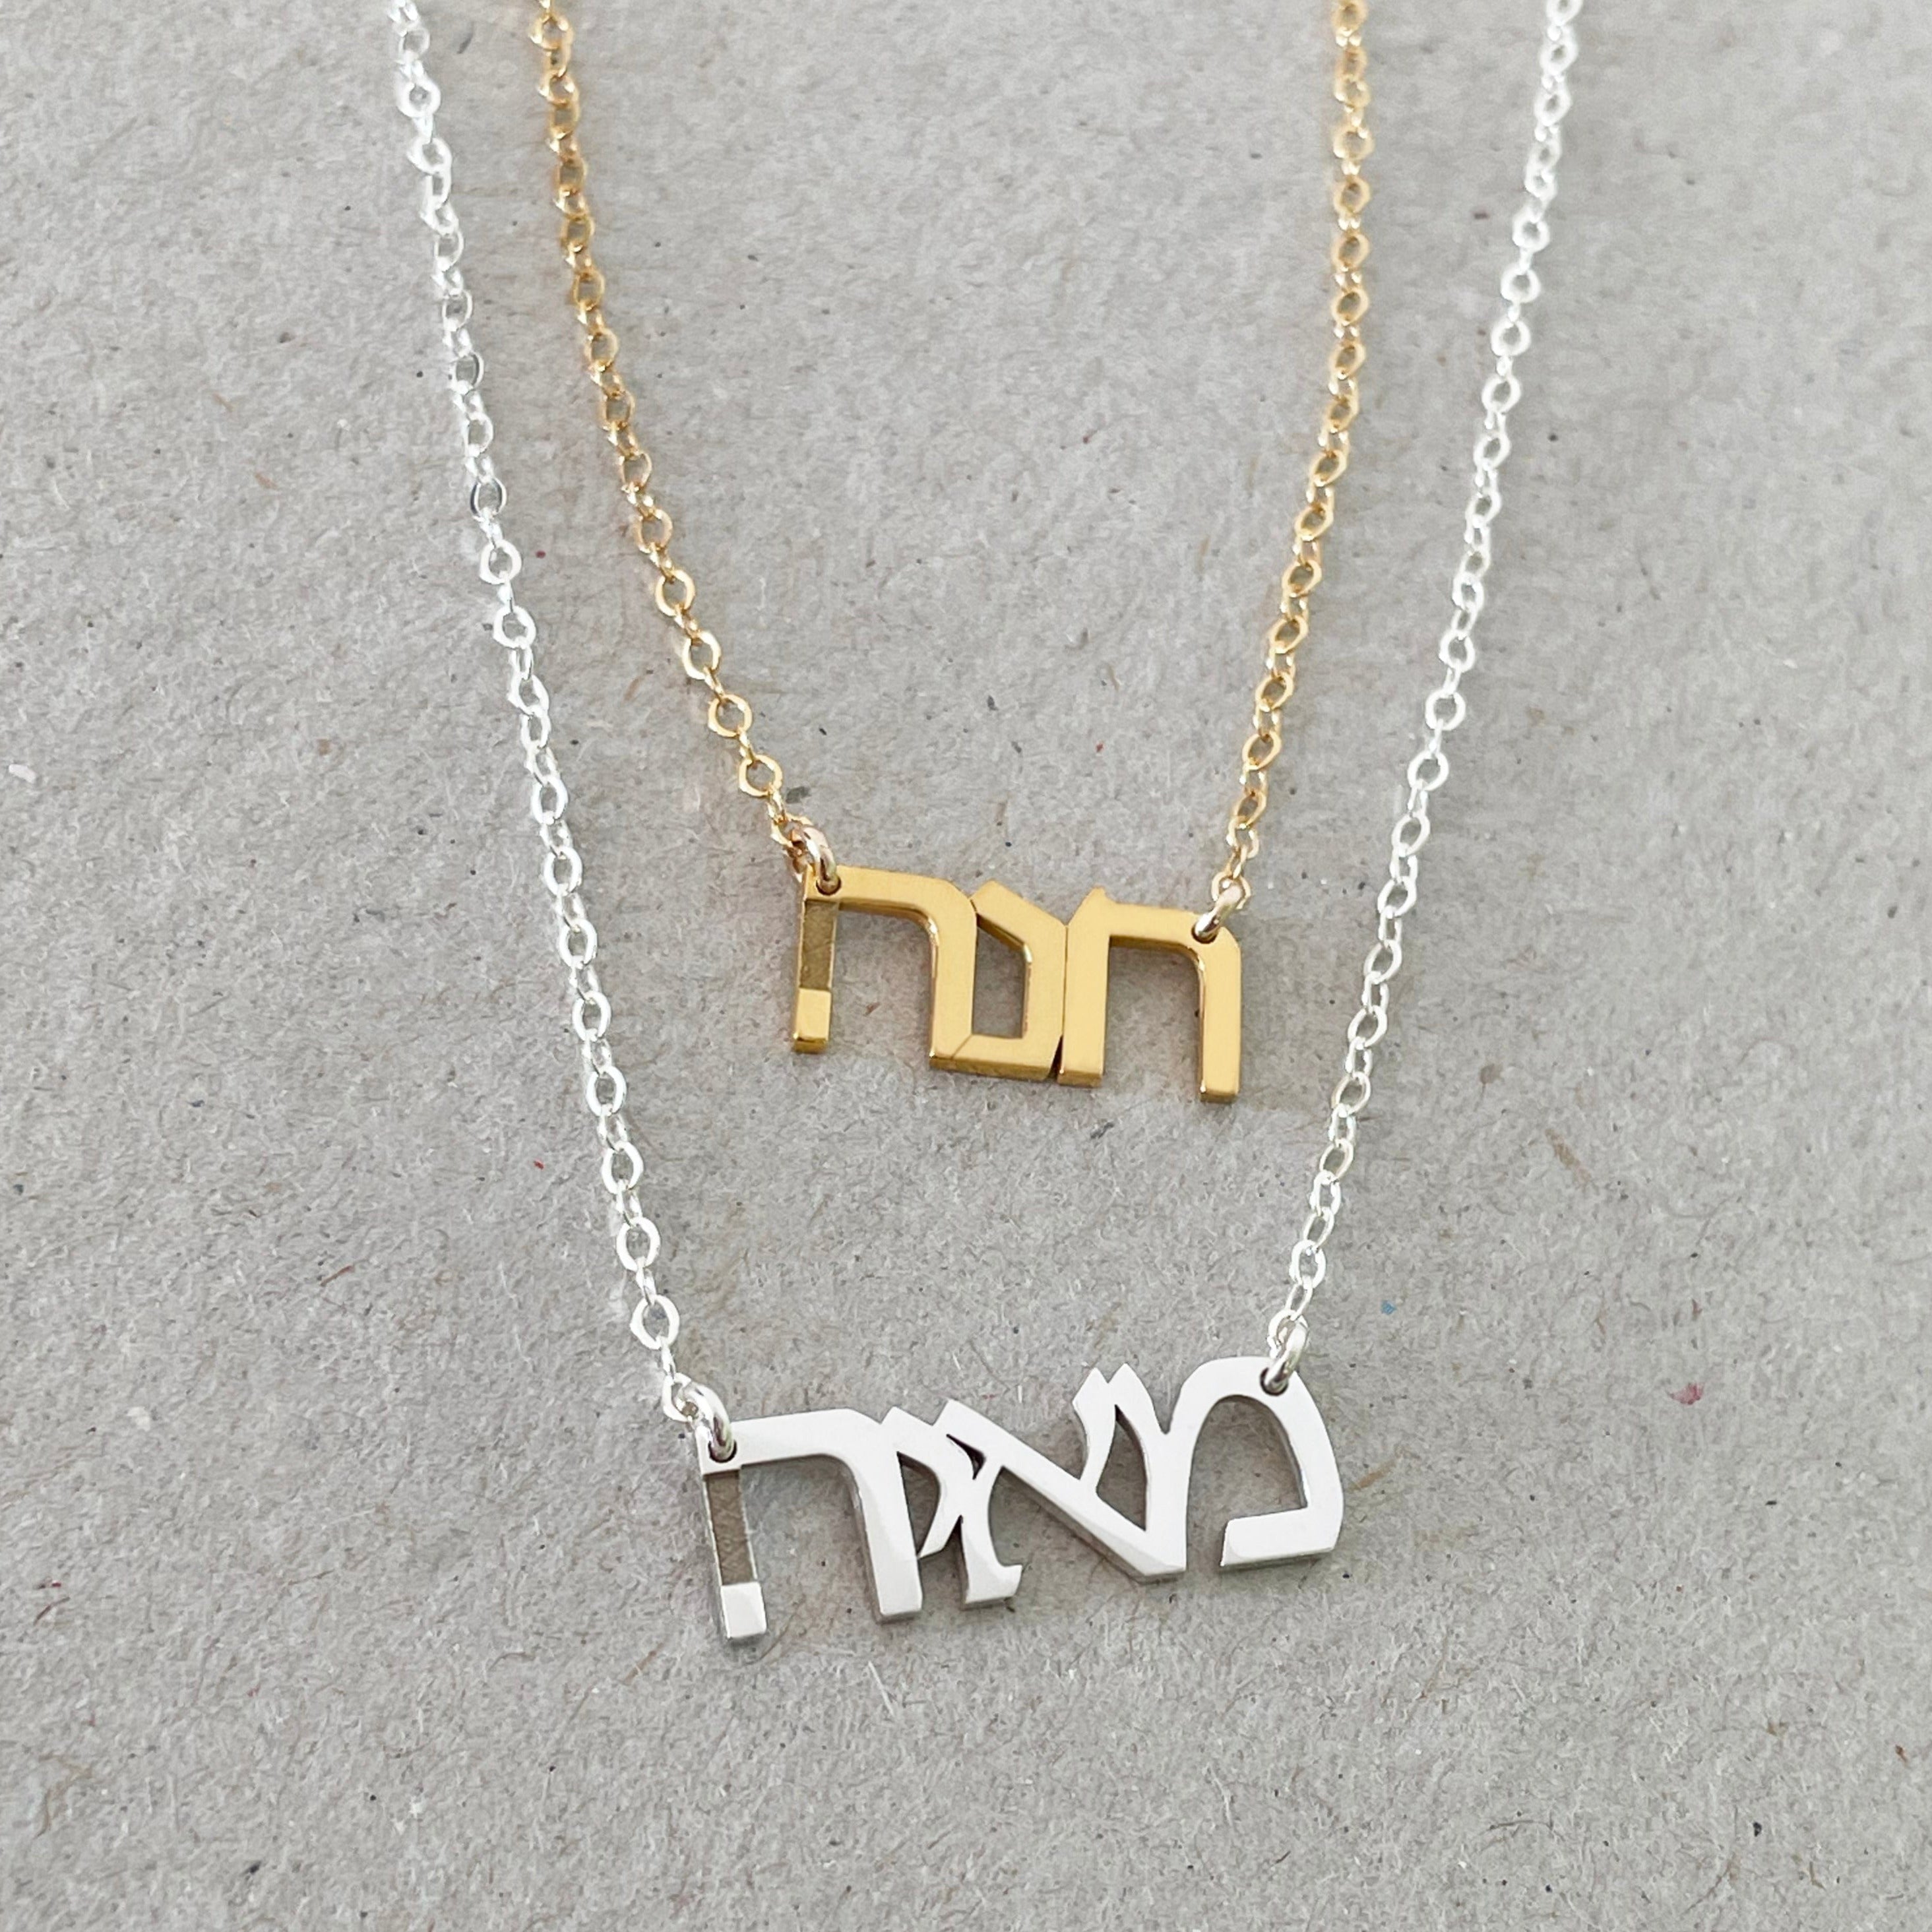 11 Best Name Necklaces to Gift in 2018 - Gold & Silver Name Necklaces